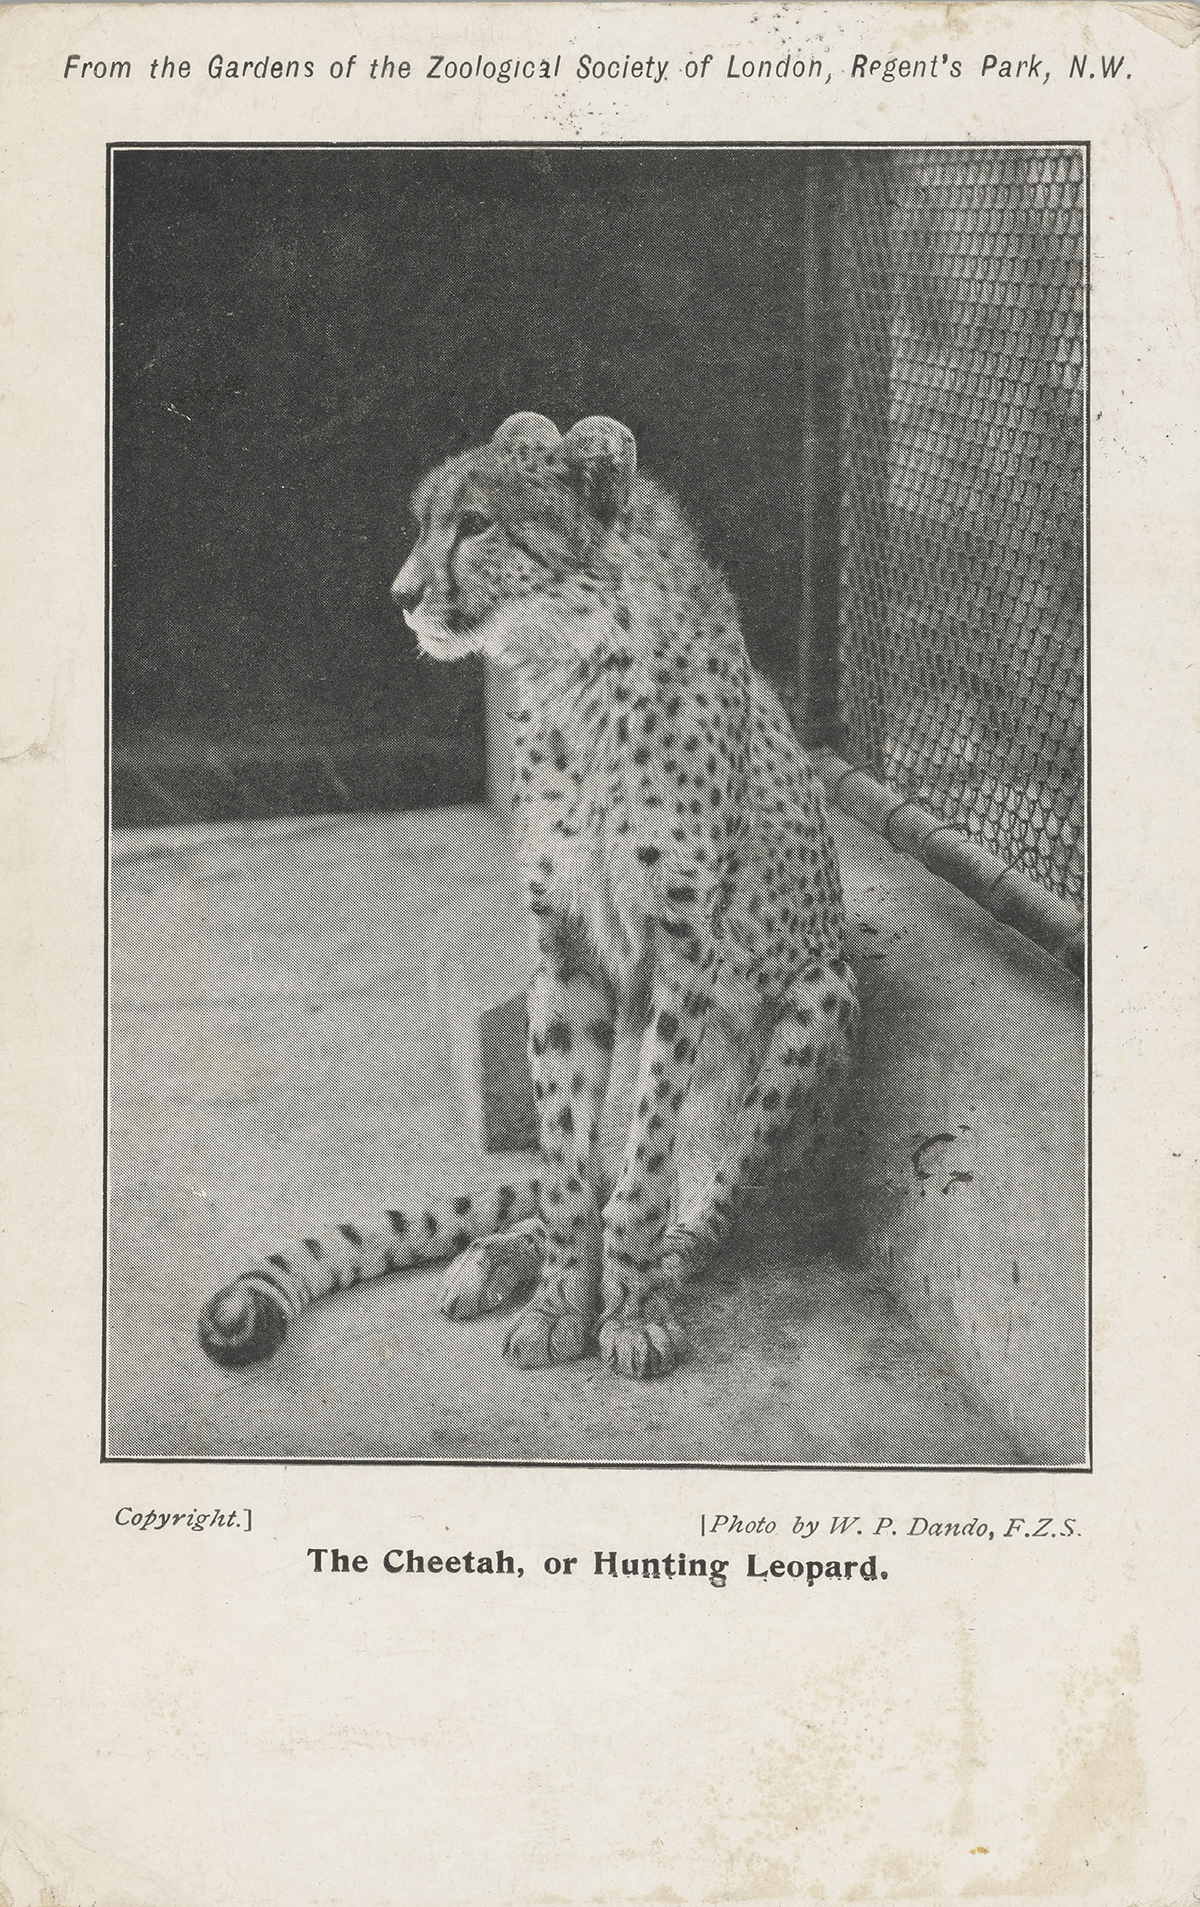 Postcard of a Cheetah at the Gardens of the Zoological Society of London, Regent’s Park. September 1905, PH64ZD/30